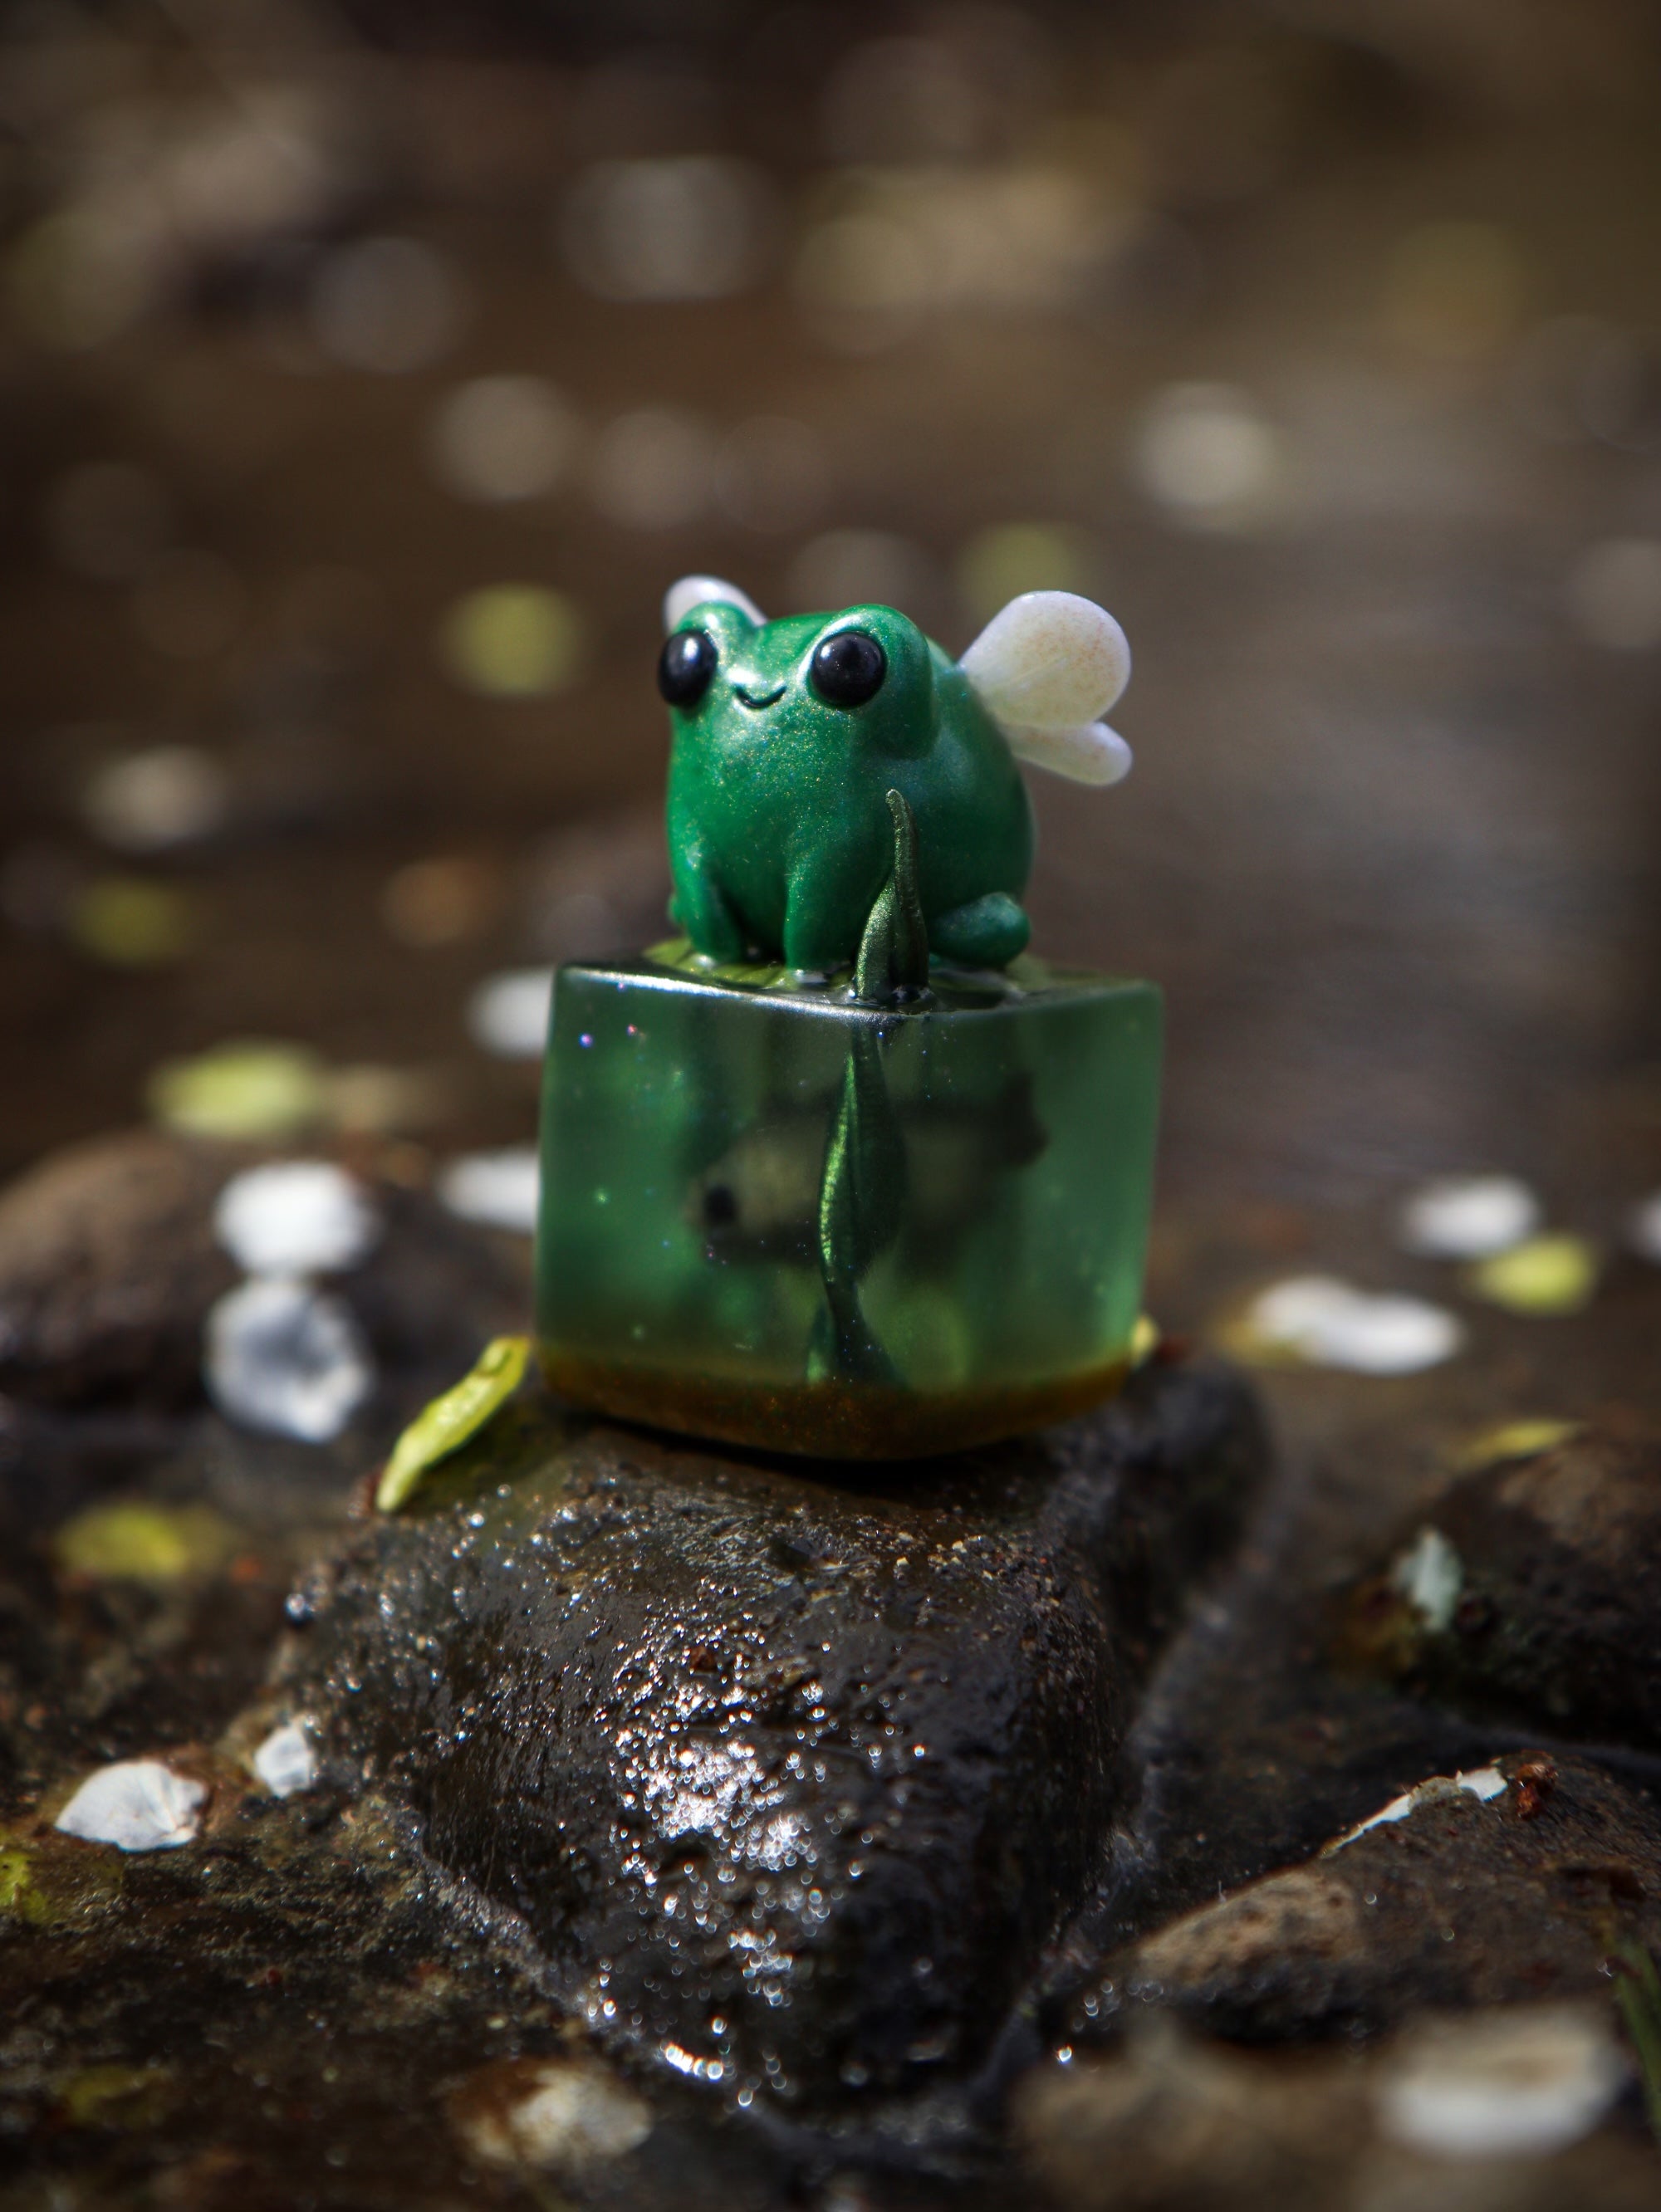 A small green frog figurine with wings perched on a cube, part of the Little Shit Big Deal - CUBES collection by Fairies And Fancies at Strangecat Toys.